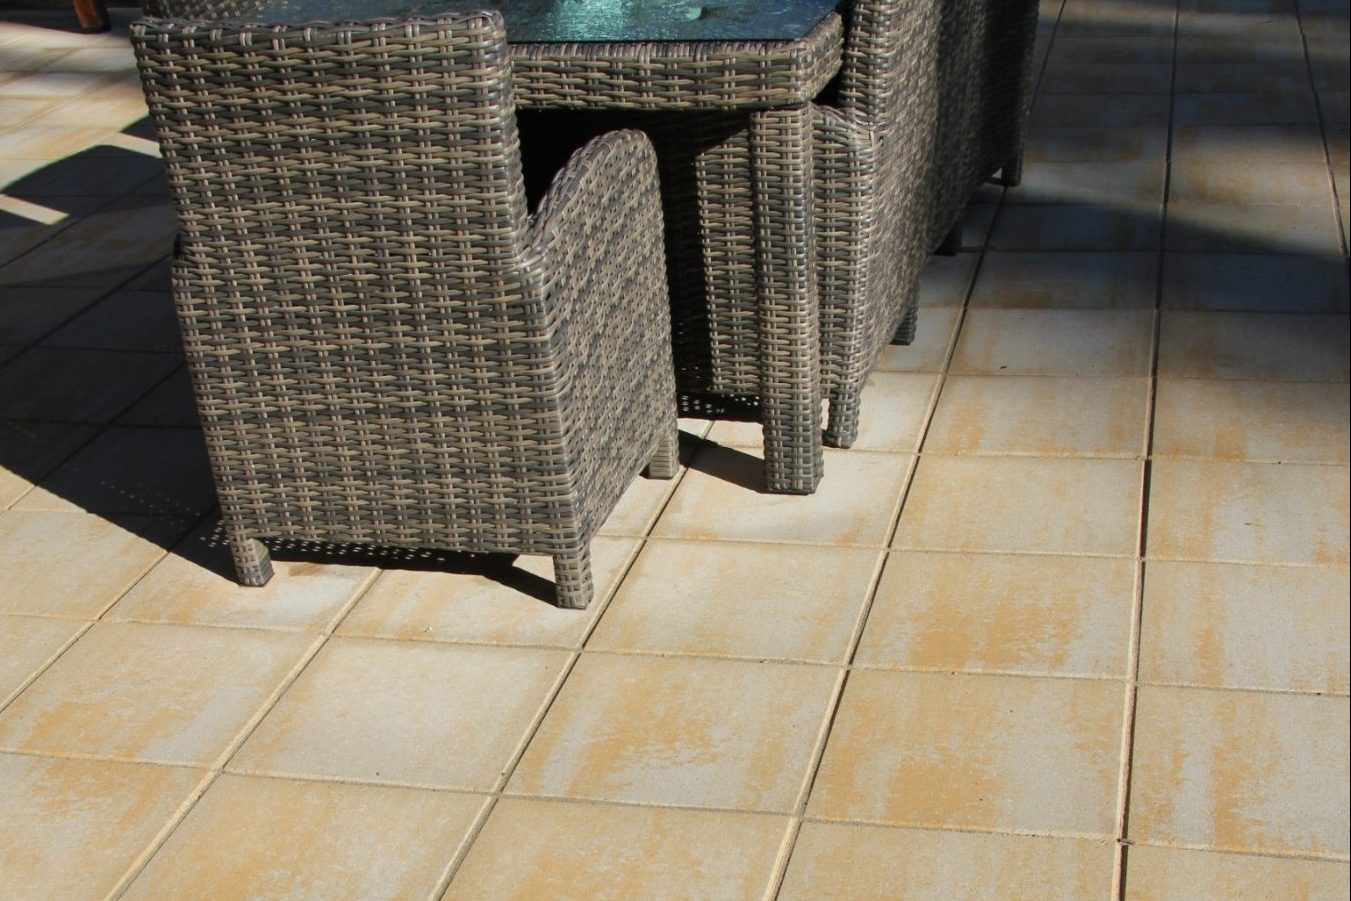 Clean_concrete_pavers_without_weeds_used_for_a_patio.